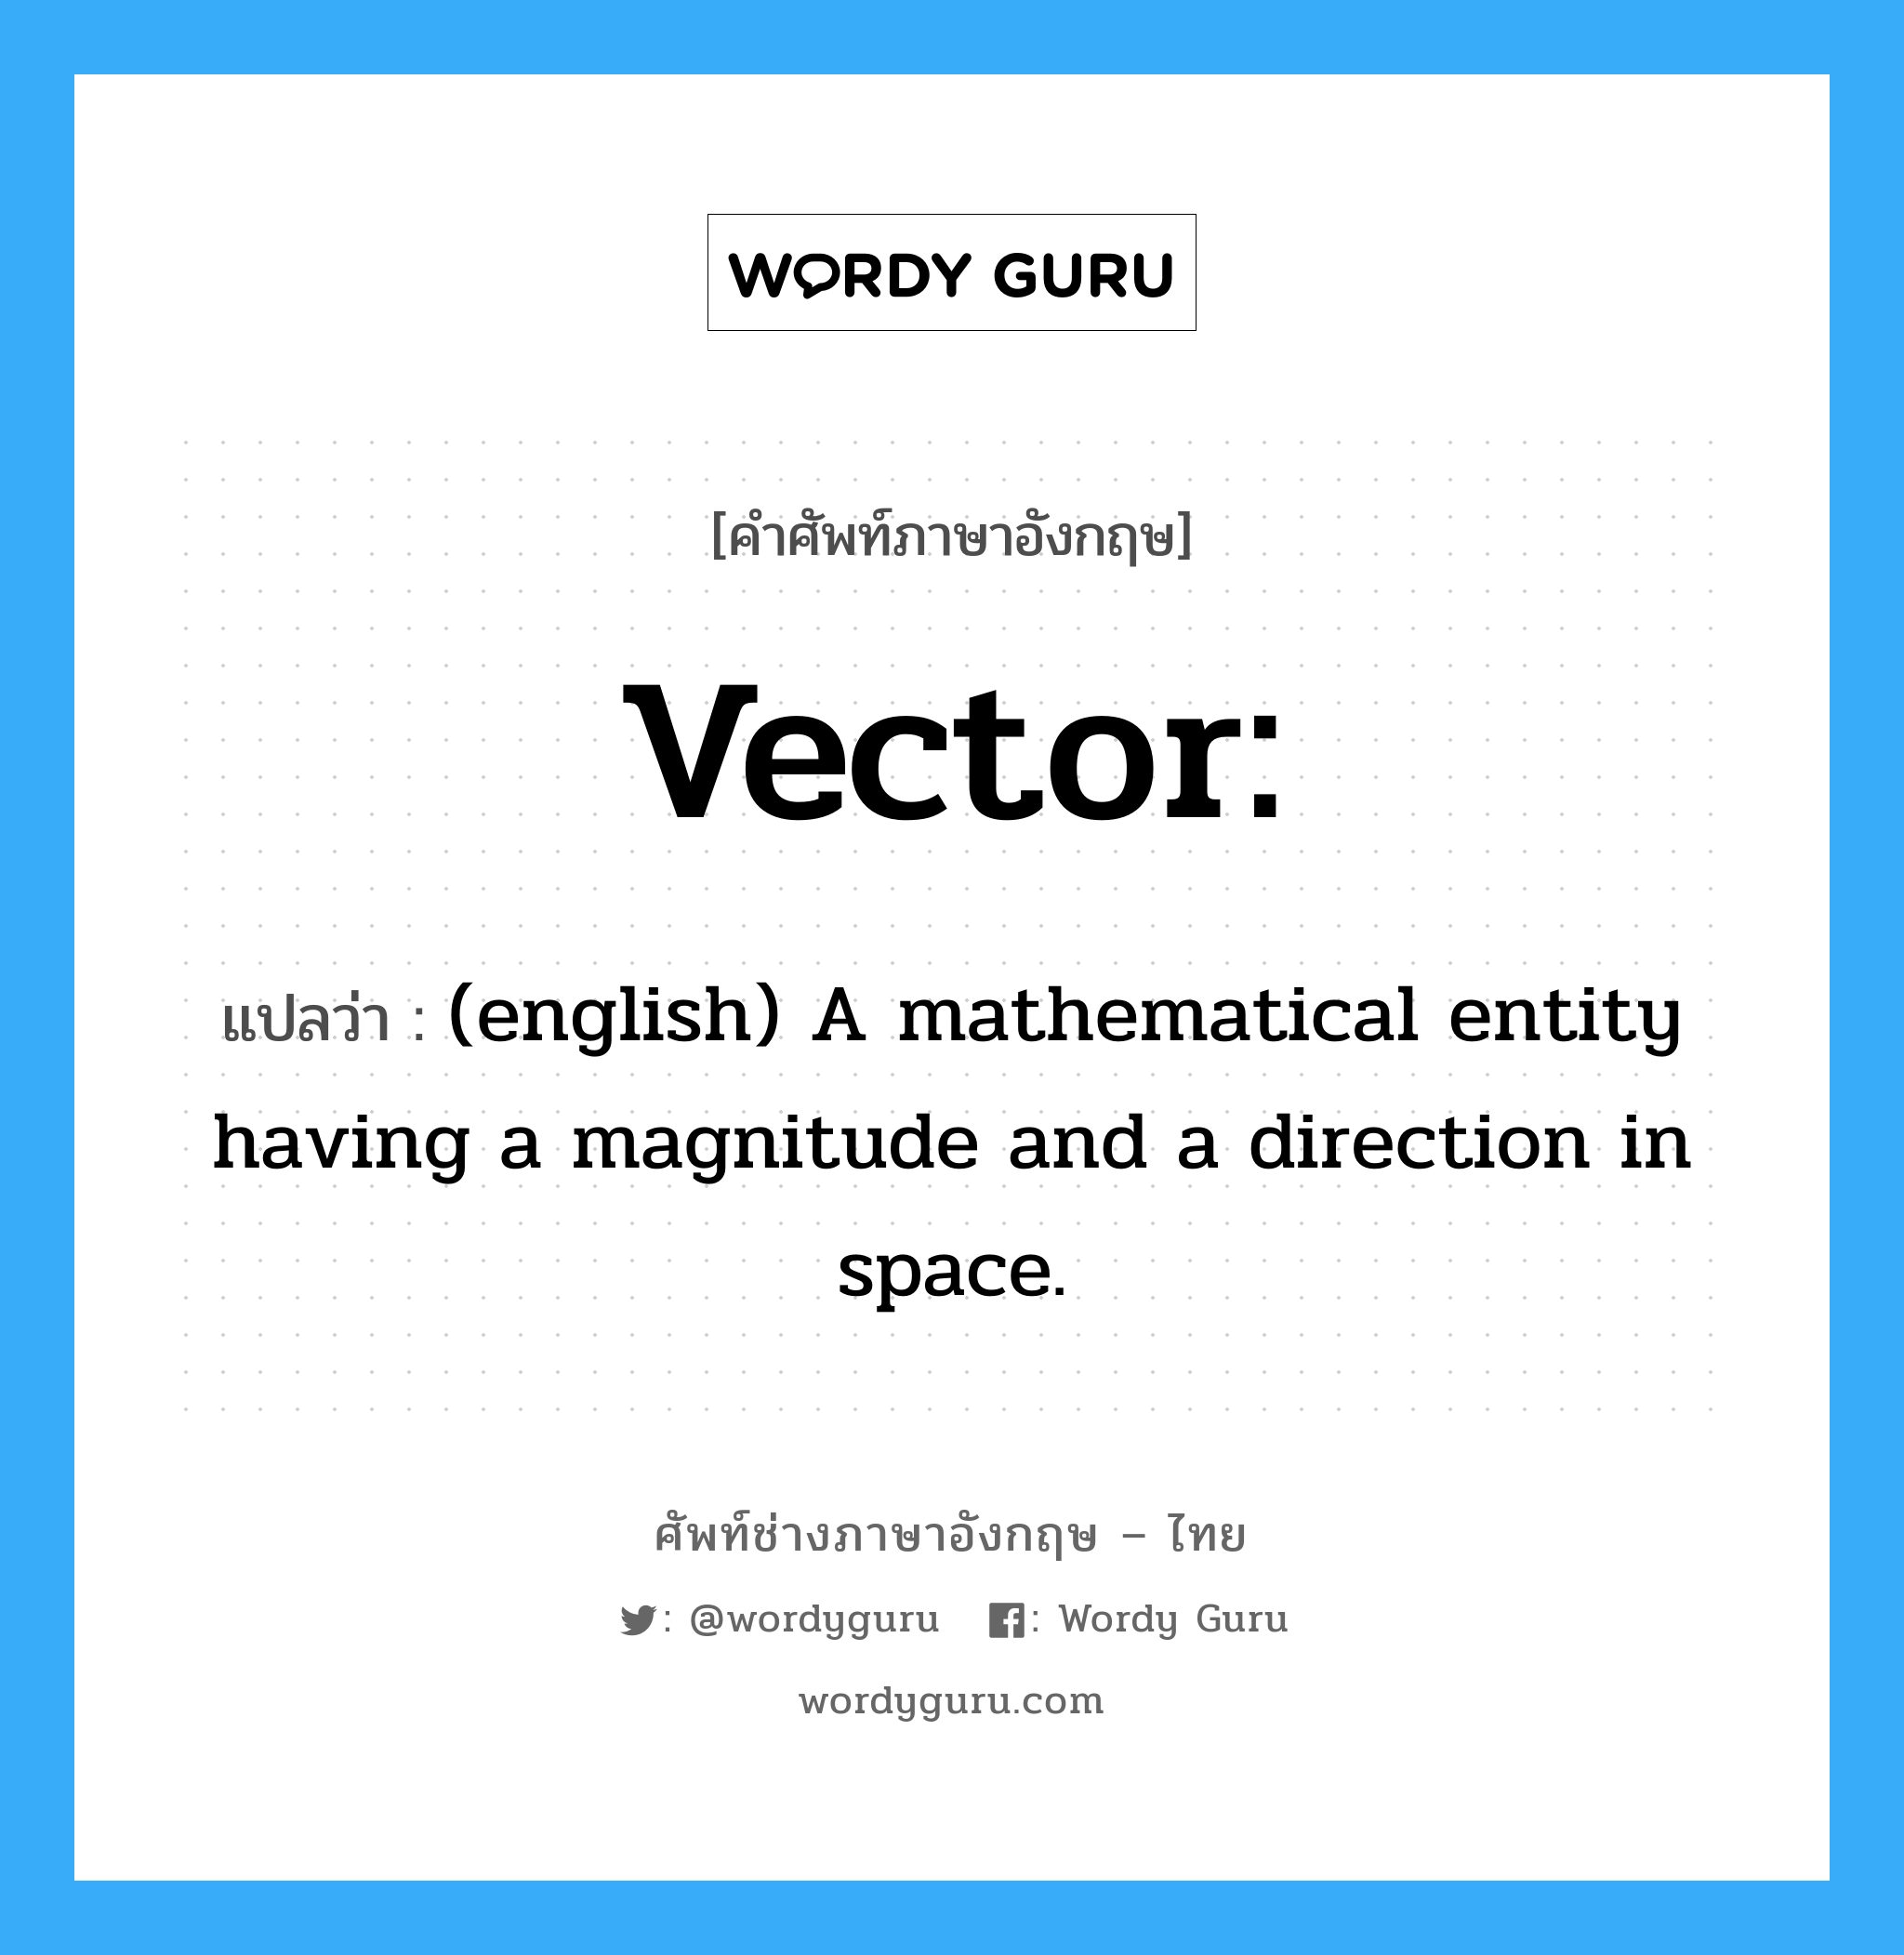 vector แปลว่า?, คำศัพท์ช่างภาษาอังกฤษ - ไทย Vector: คำศัพท์ภาษาอังกฤษ Vector: แปลว่า (english) A mathematical entity having a magnitude and a direction in space.